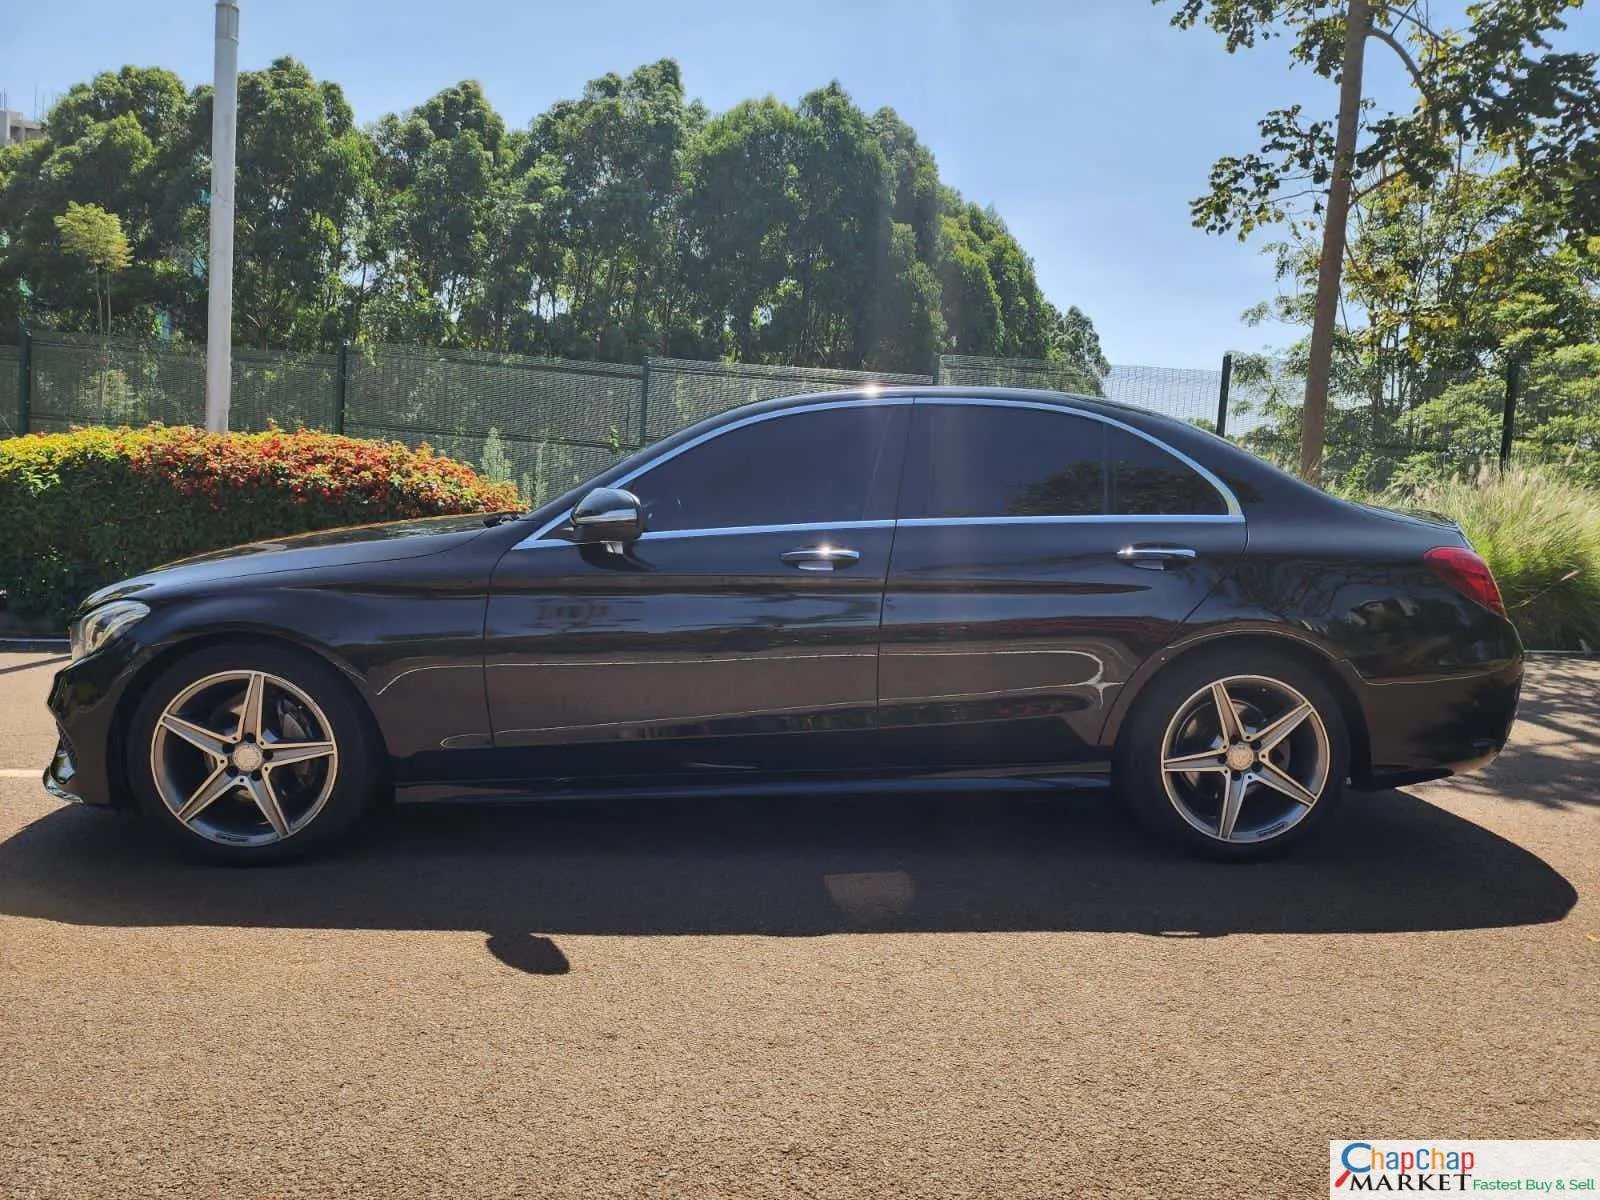 Mercedes Benz C180 You Pay 30% DEPOSIT hire purchase installments Trade in OK c180 for sale in kenya